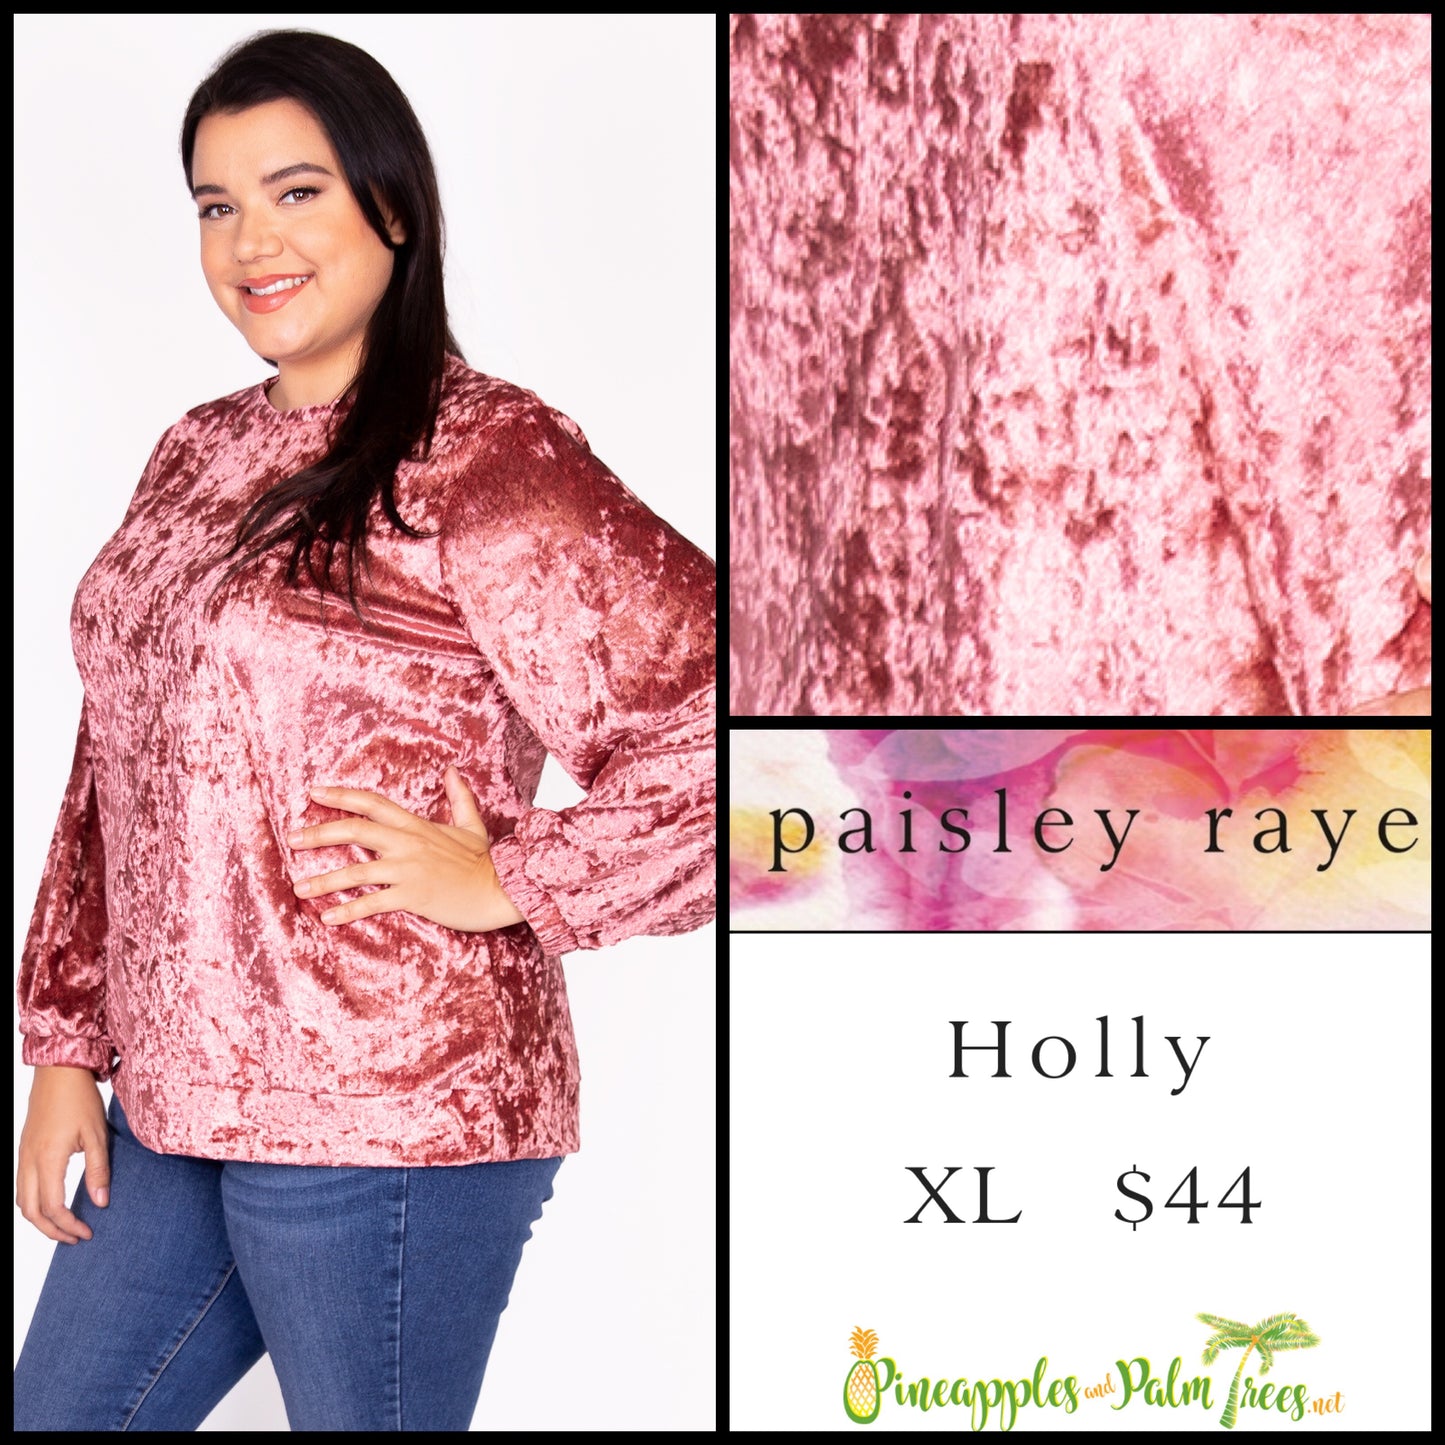 Top: Holly XL - pink